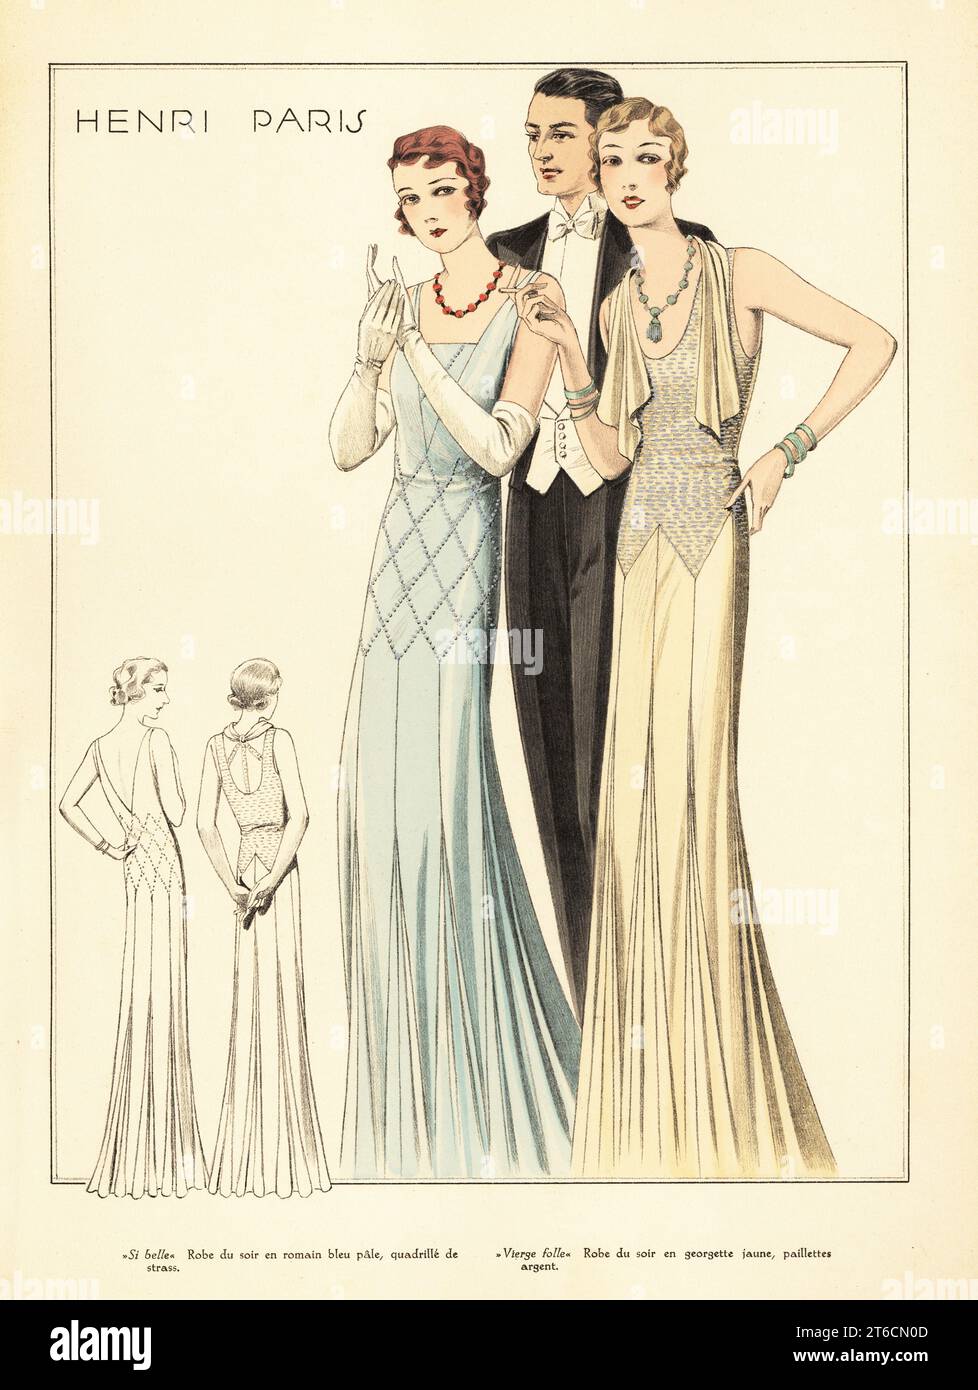 Woman in Si Belle evening dress in blue romain crepe. Woman in Vierge Folle evening dress in yellow crepe georgette decorated with spangles. Marcel wave bob hairstyles. Fashion designs by Henri Paris. Handcoloured pochoir lithograph from La Grande Couture, Creations pour la Femme Mondaine, Atelier Bachwitz, publisher of Chic Parisien, Vienna, September, 1931. Stock Photo